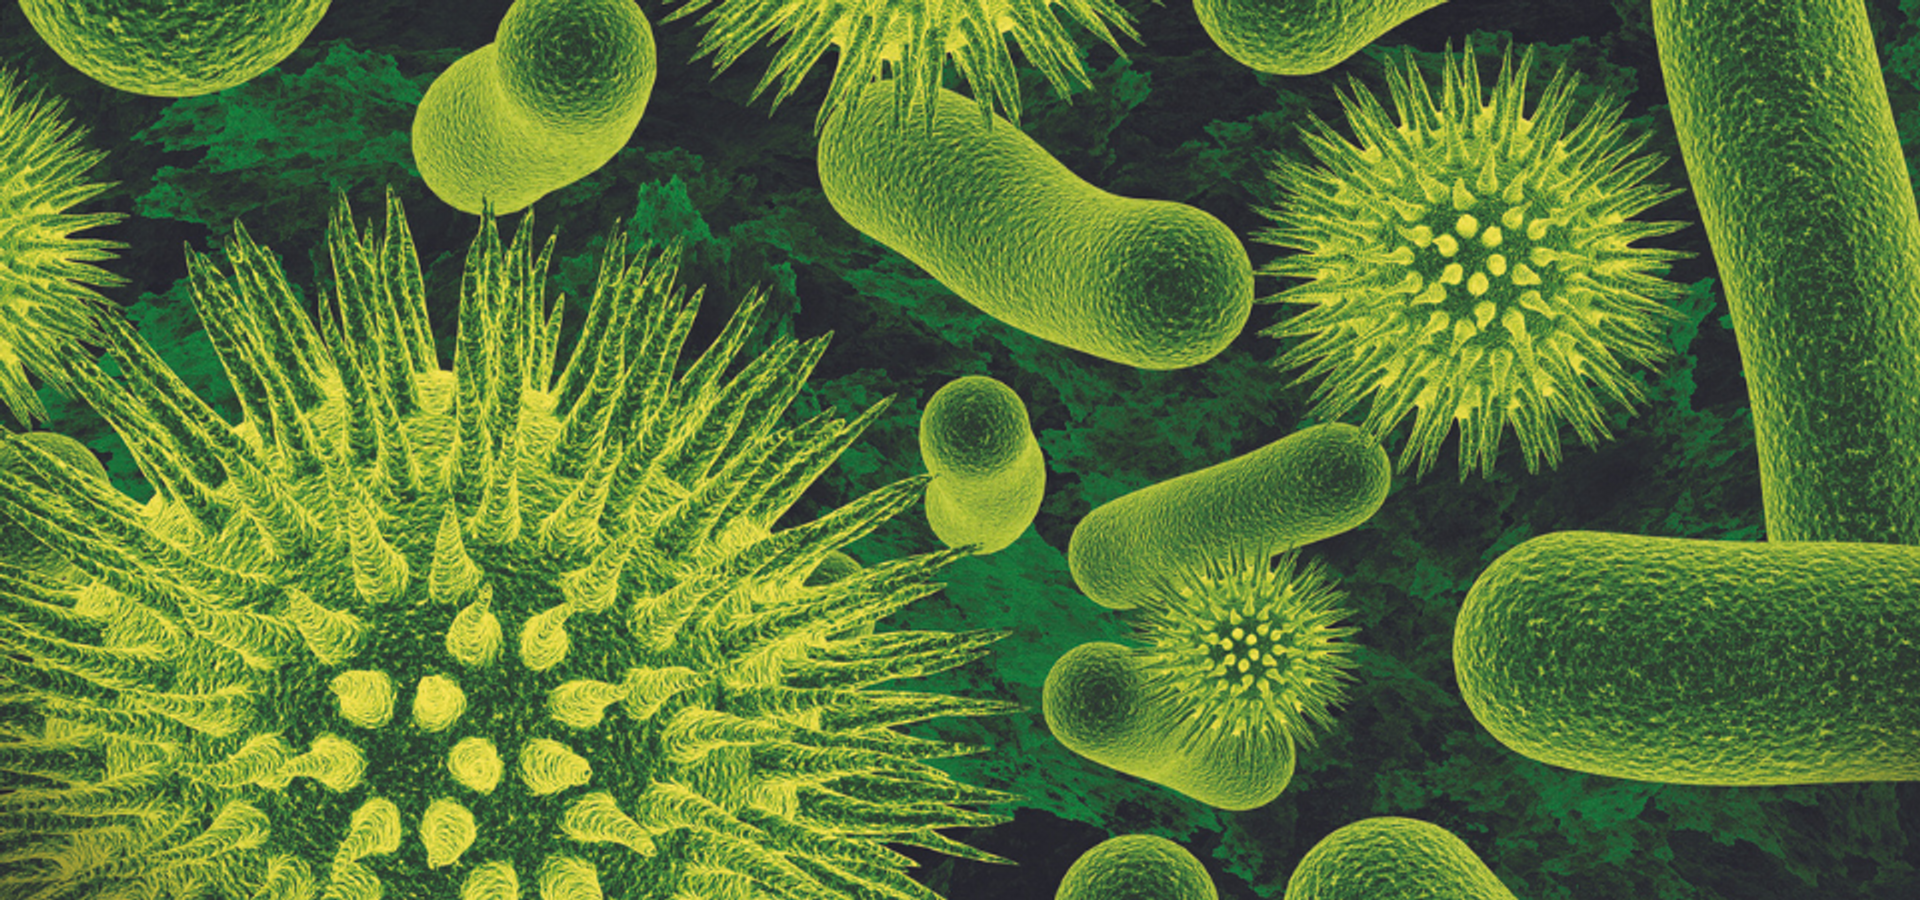 Enzymes vs. Bacteria, Unmuddying the Waters